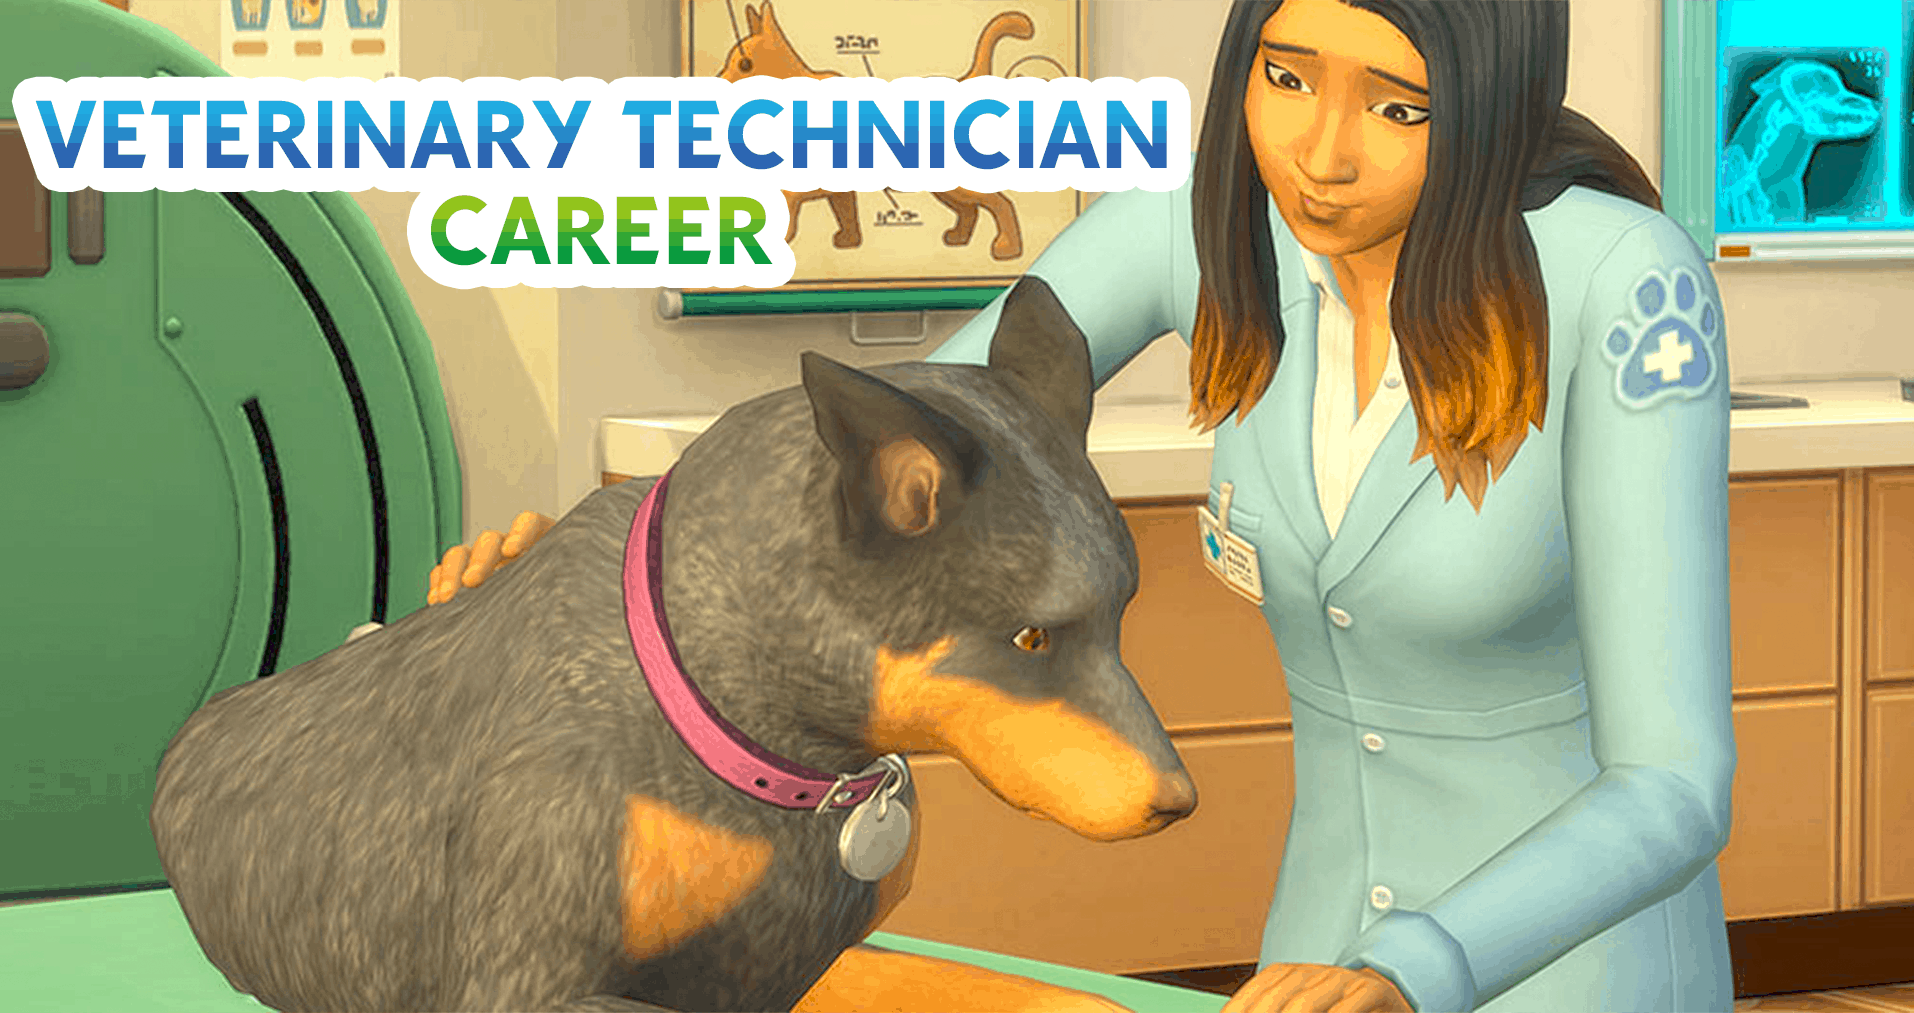 Sims 4: Cats And Dogs Cheats Guide: Vet Career, Pet Training Skill